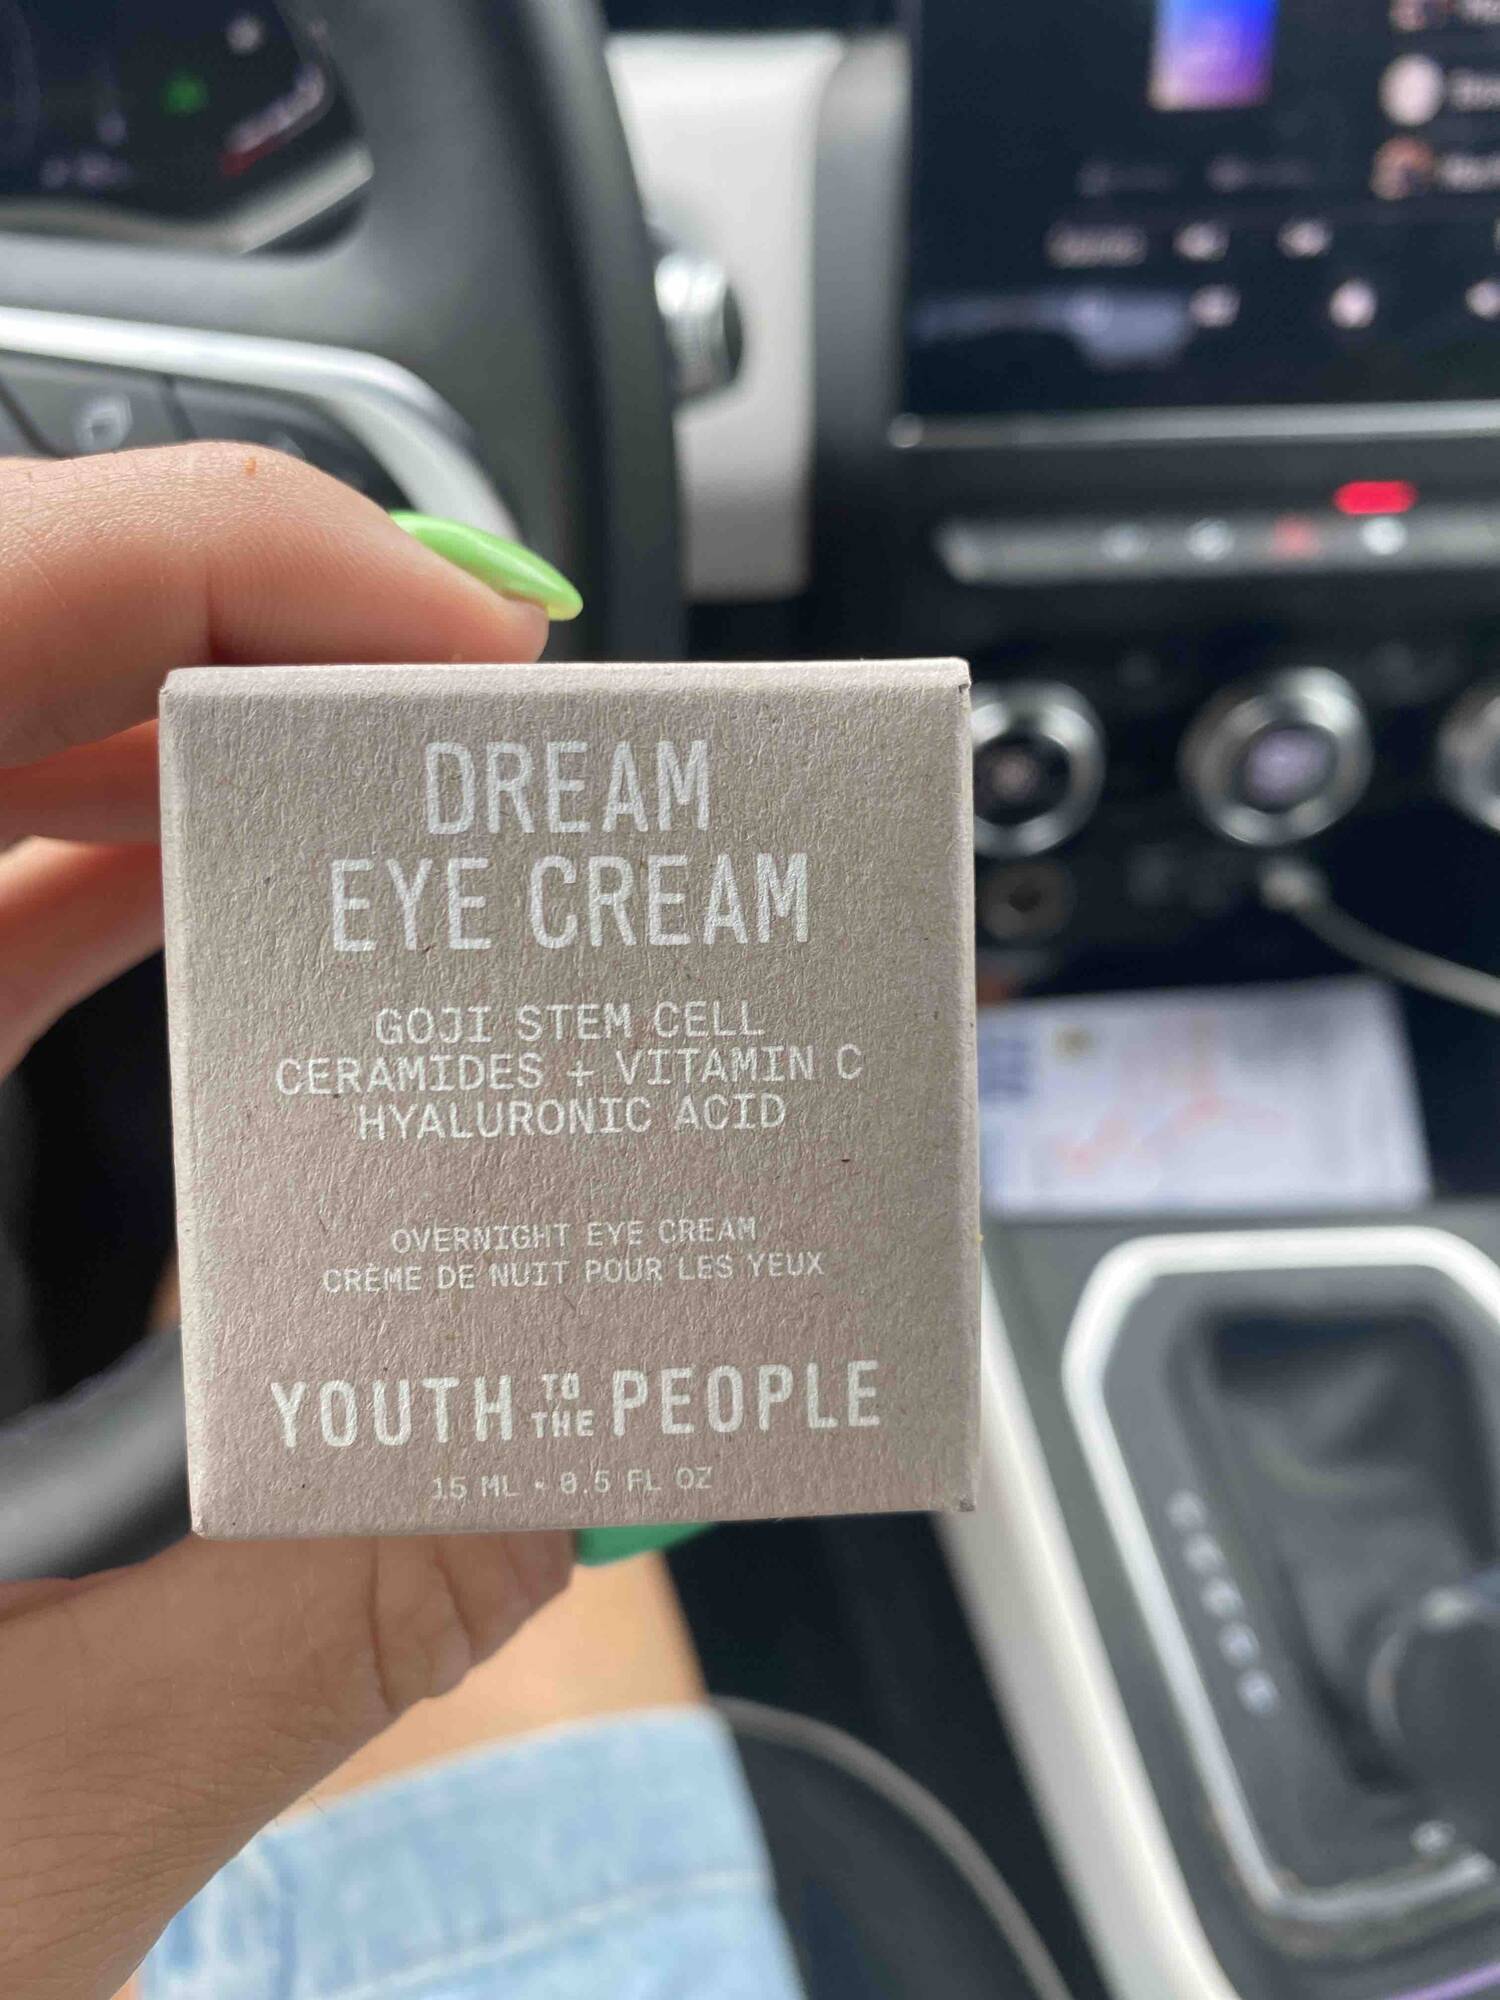 YOUTH TO THE PEOPLE - Dream eye cream